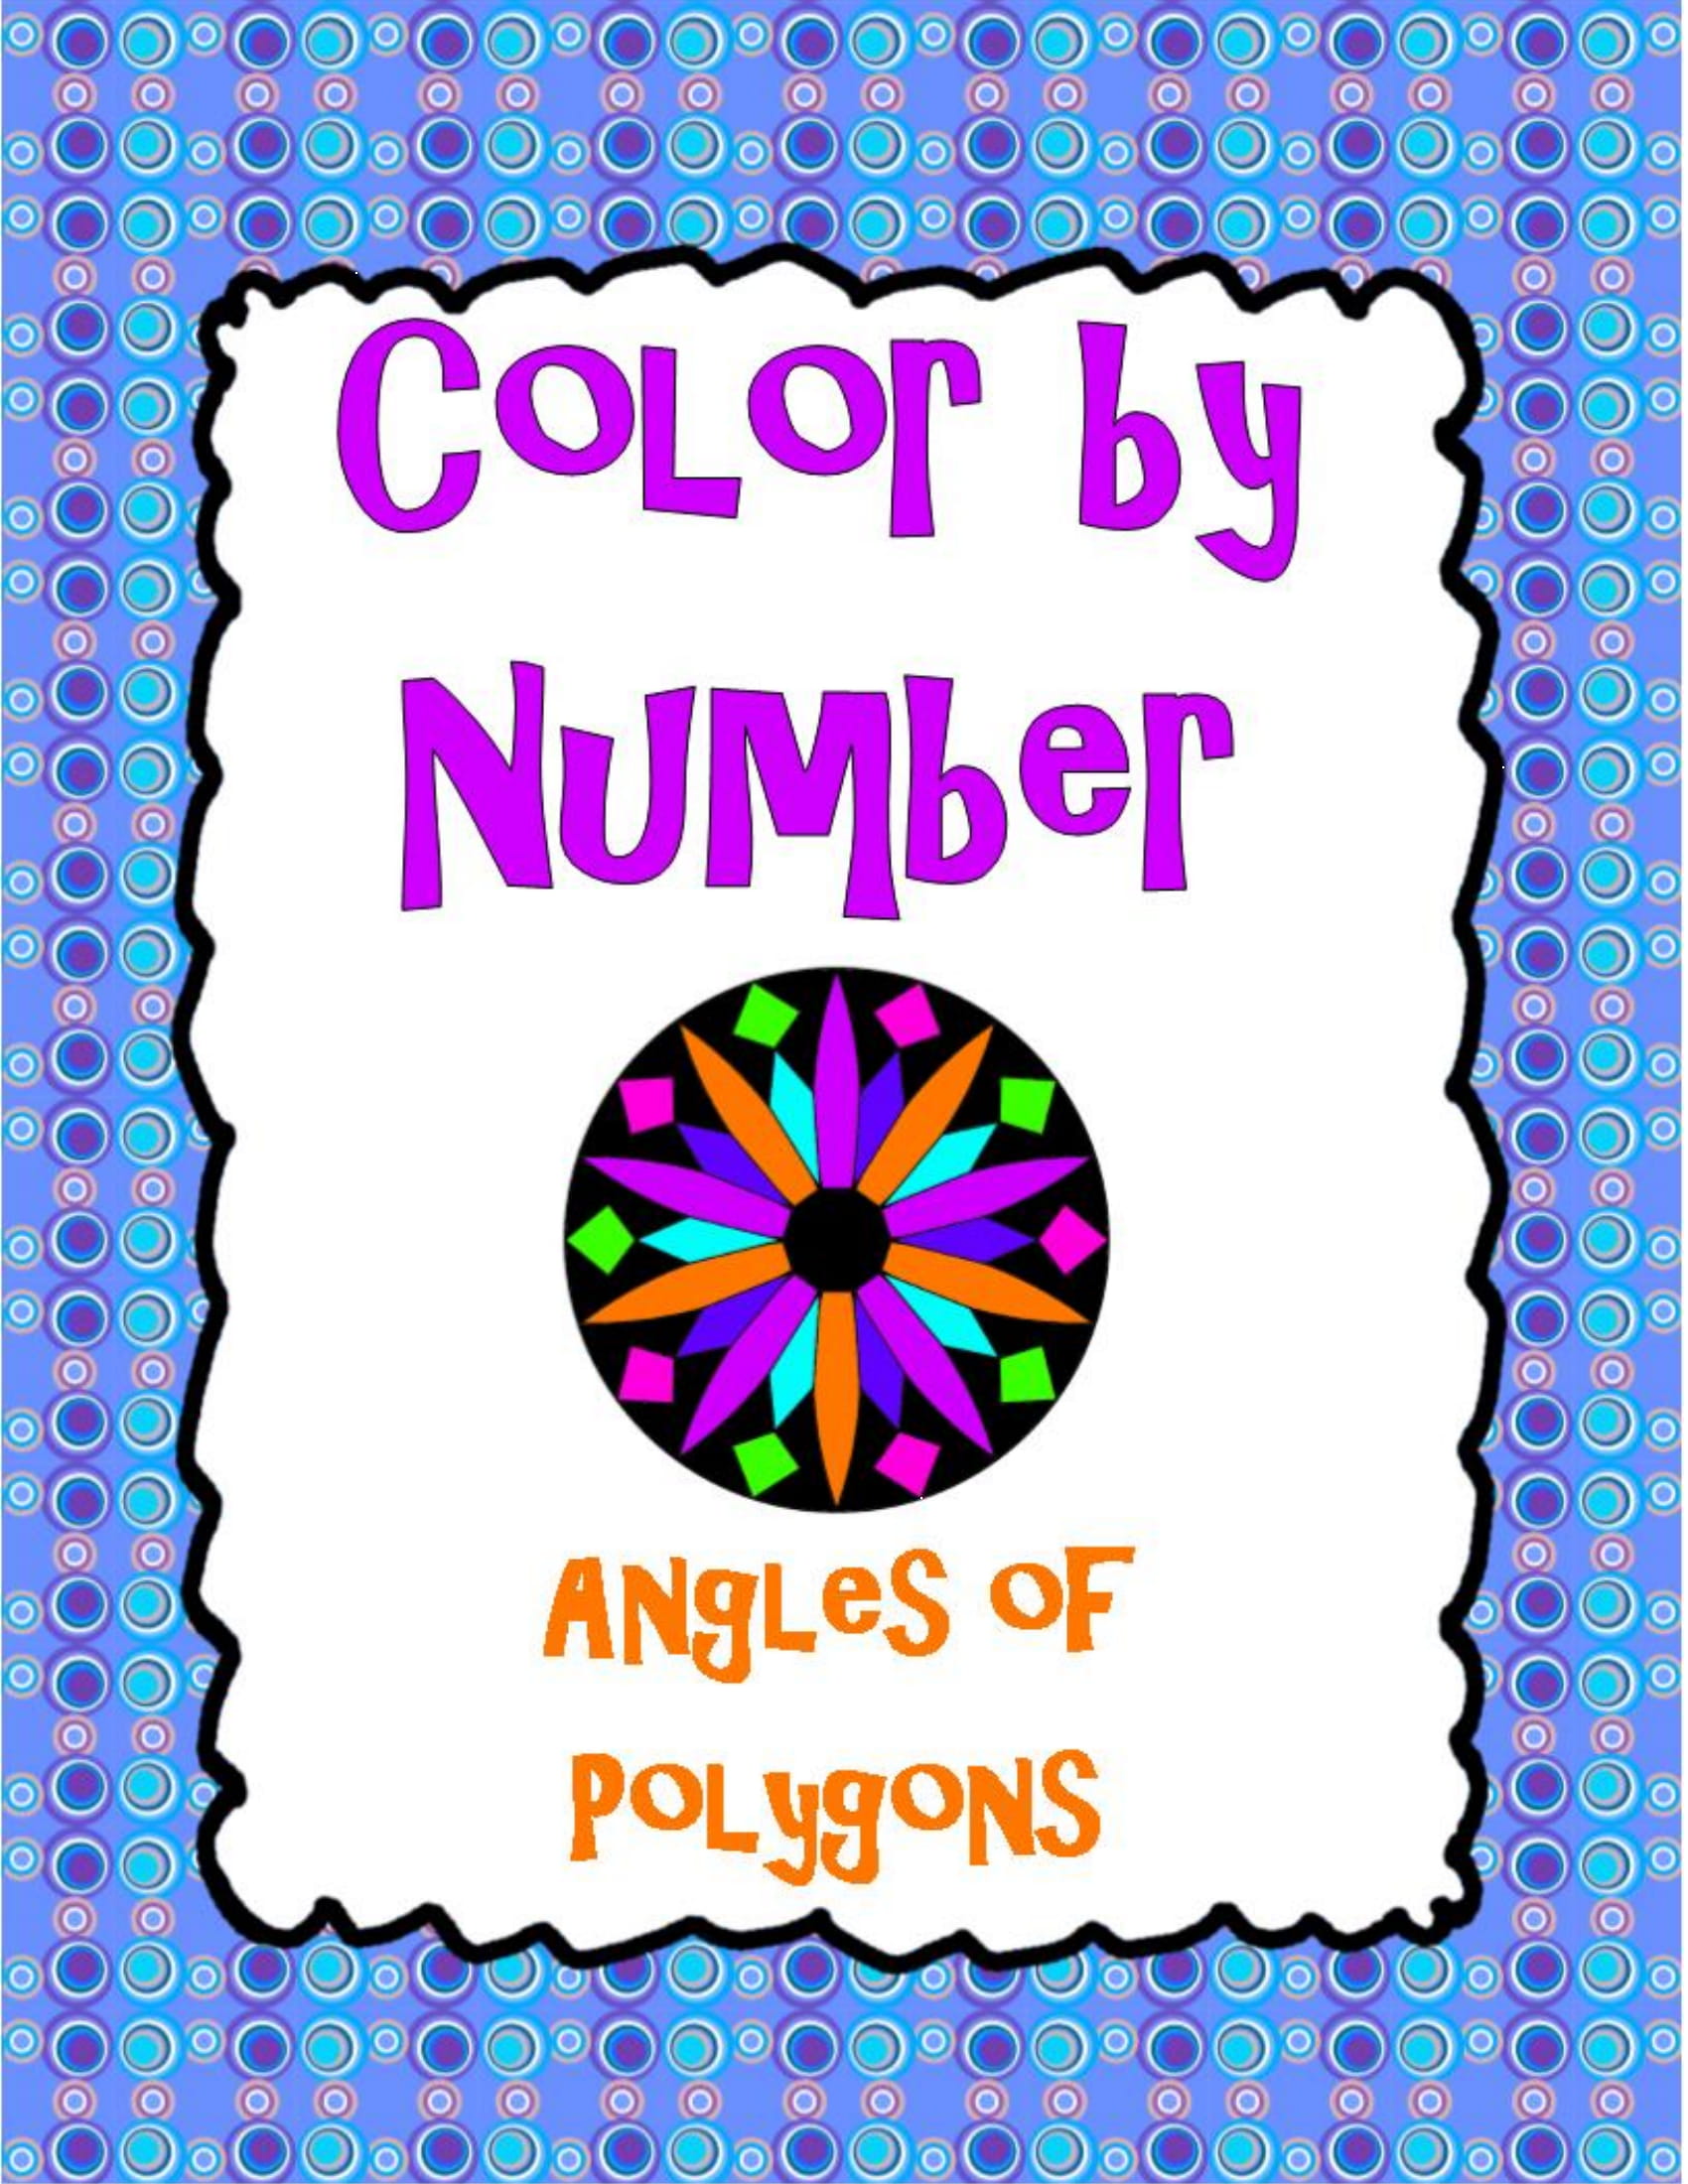 angles-of-polygons-color-by-number-1-funrithmetic